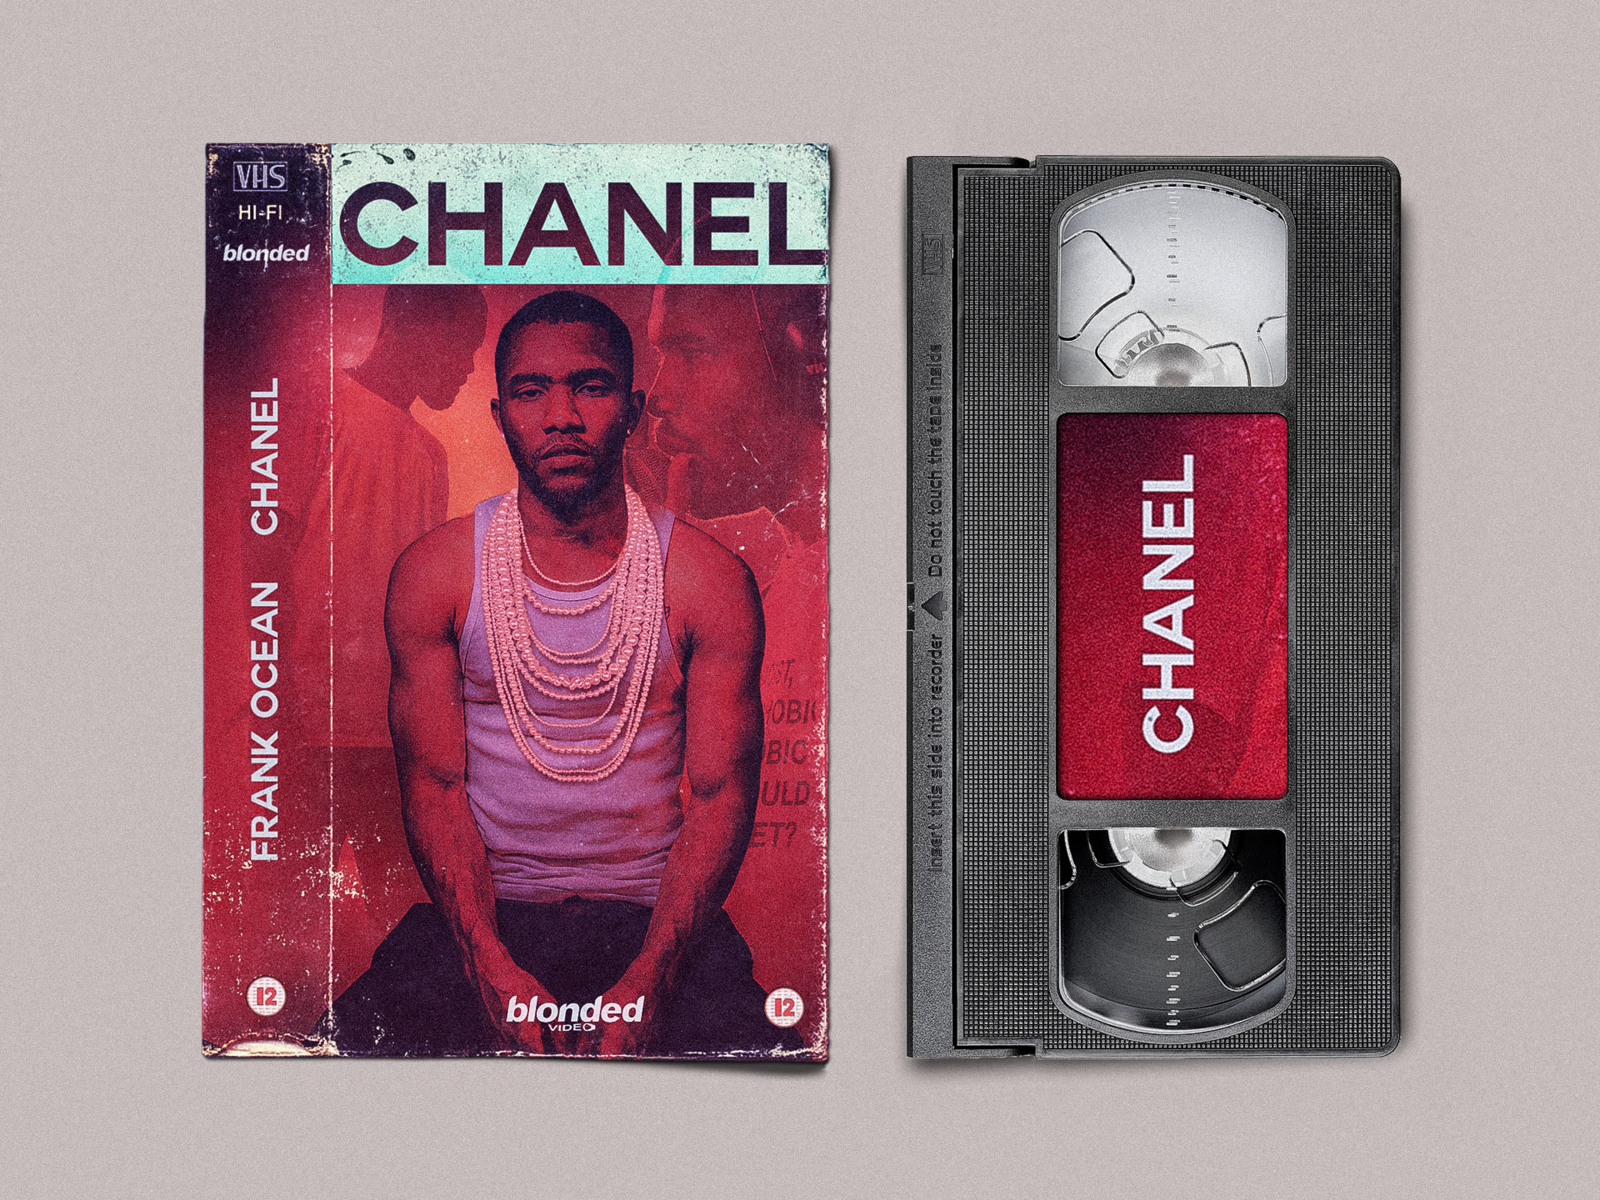 Frank Ocean - Chanel Cover Art by André Guevara on Dribbble